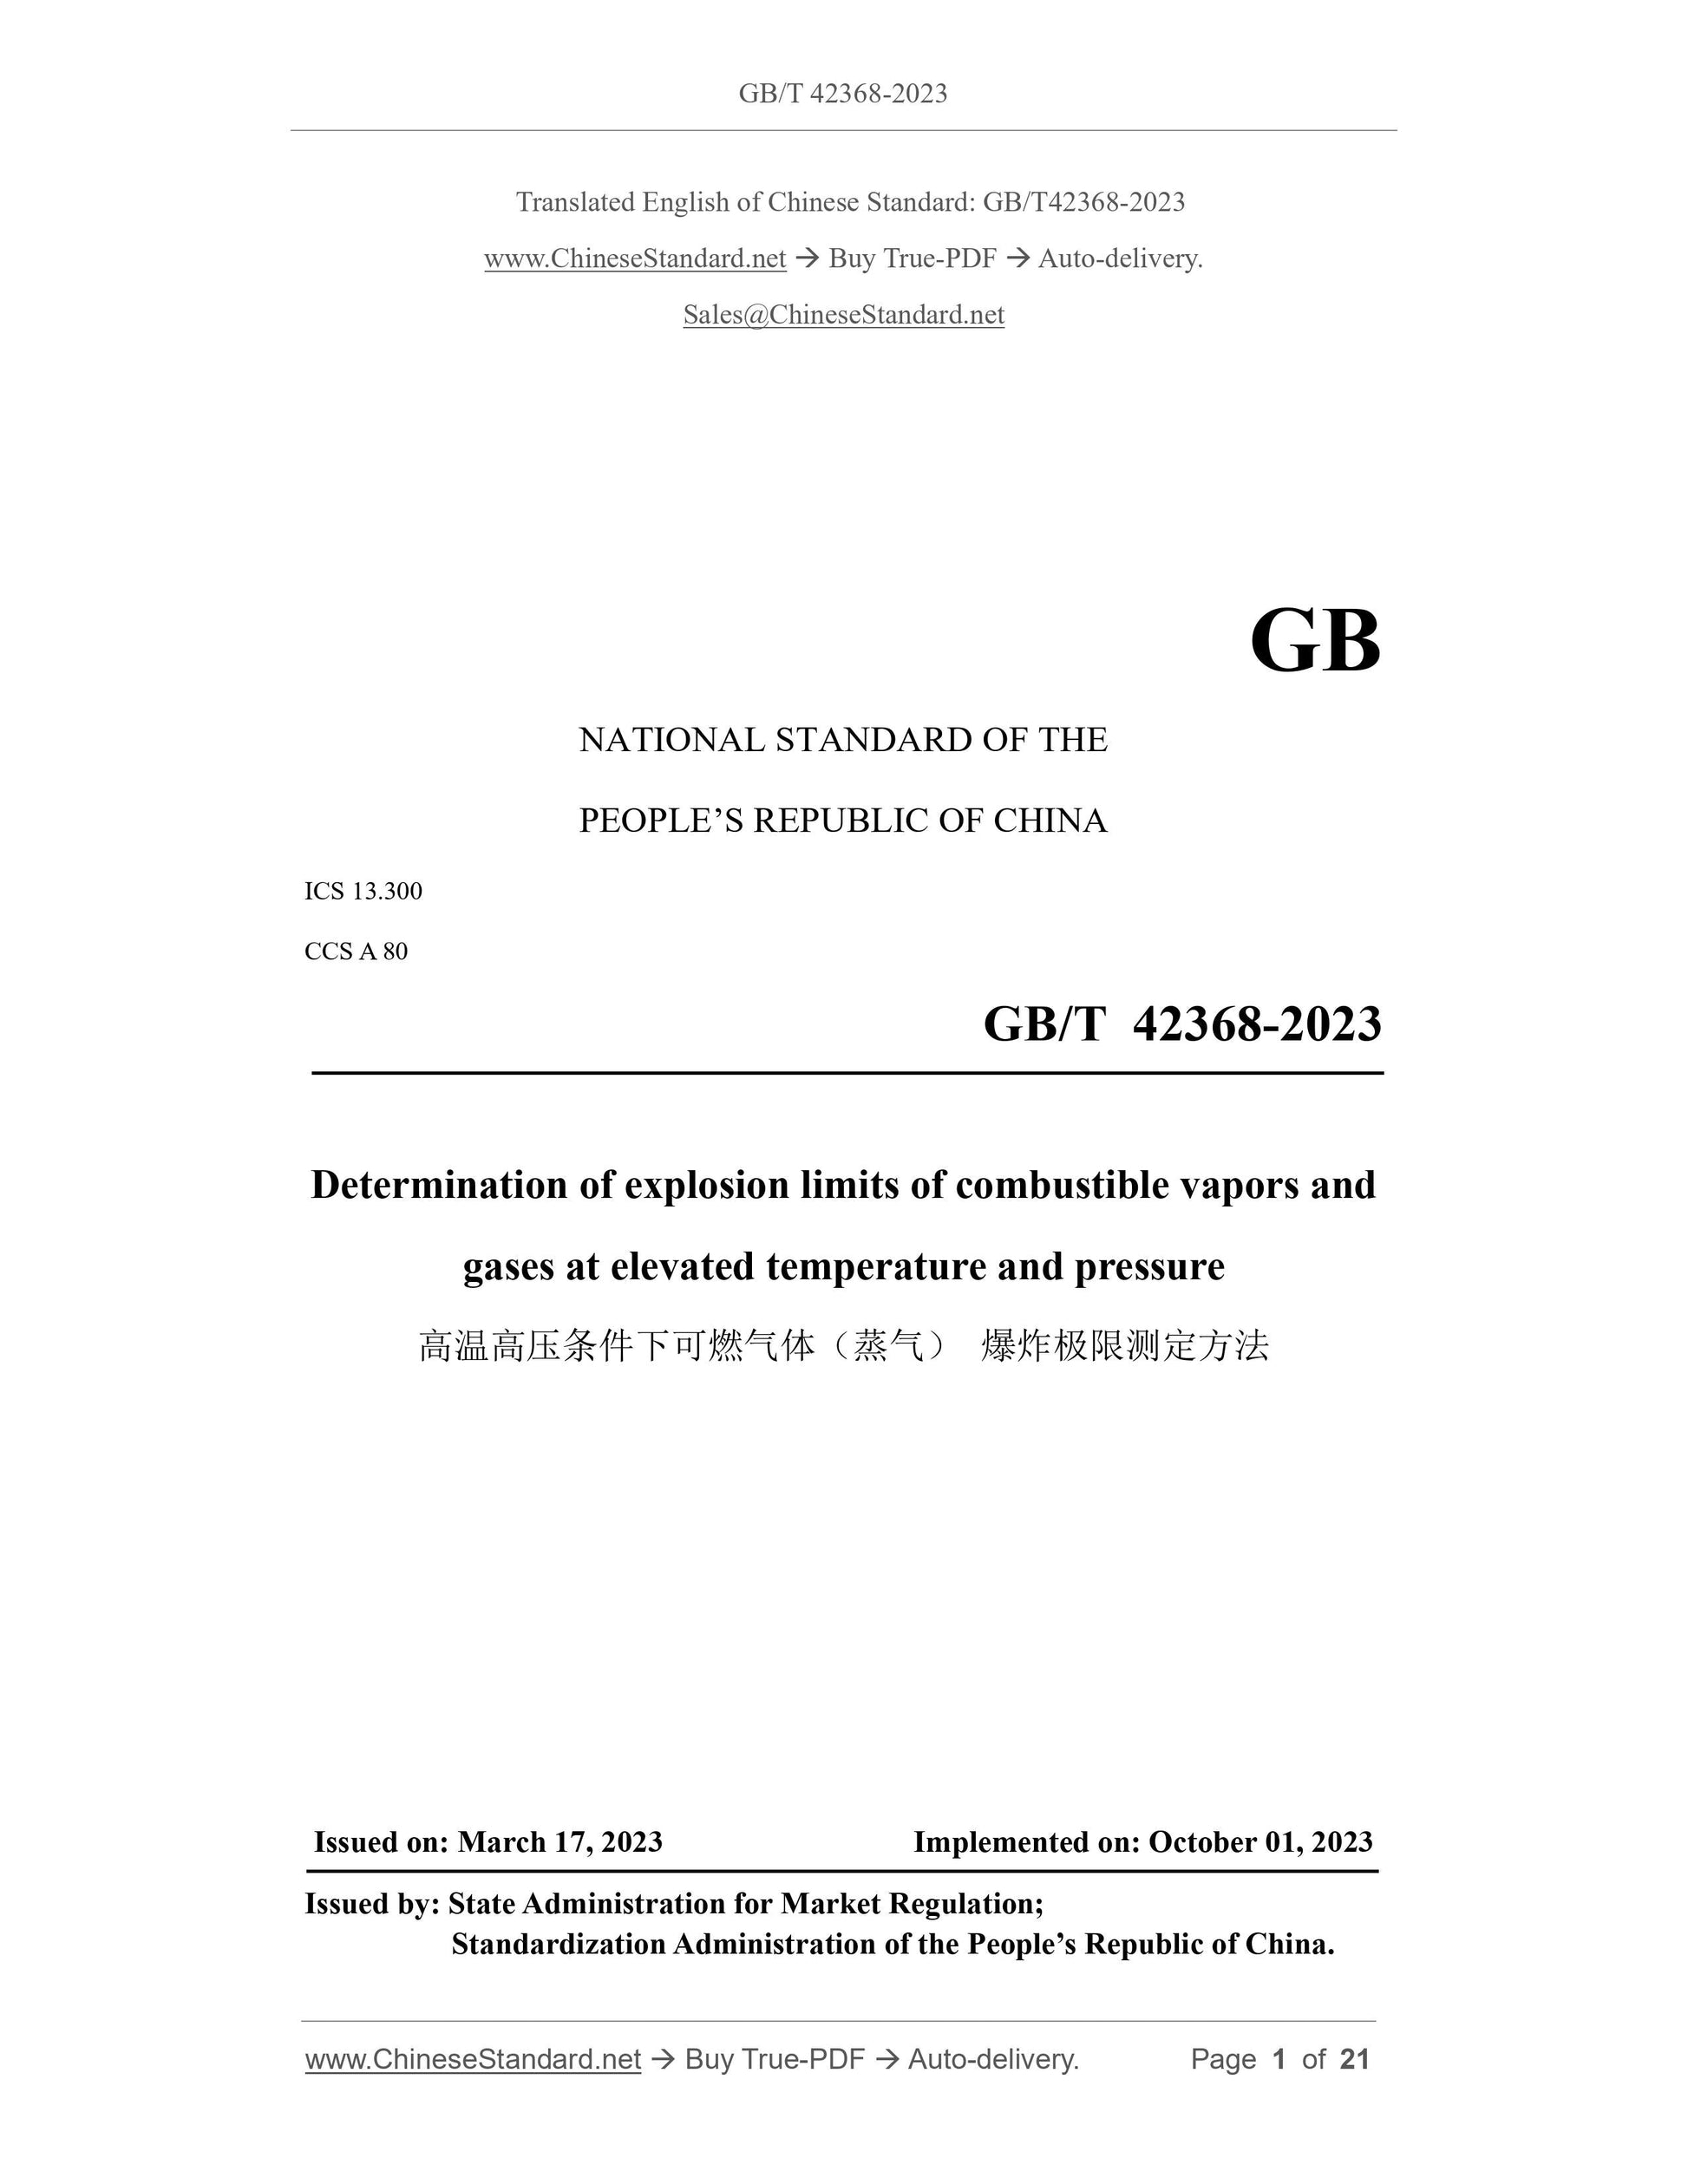 GB/T 42368-2023 Page 1